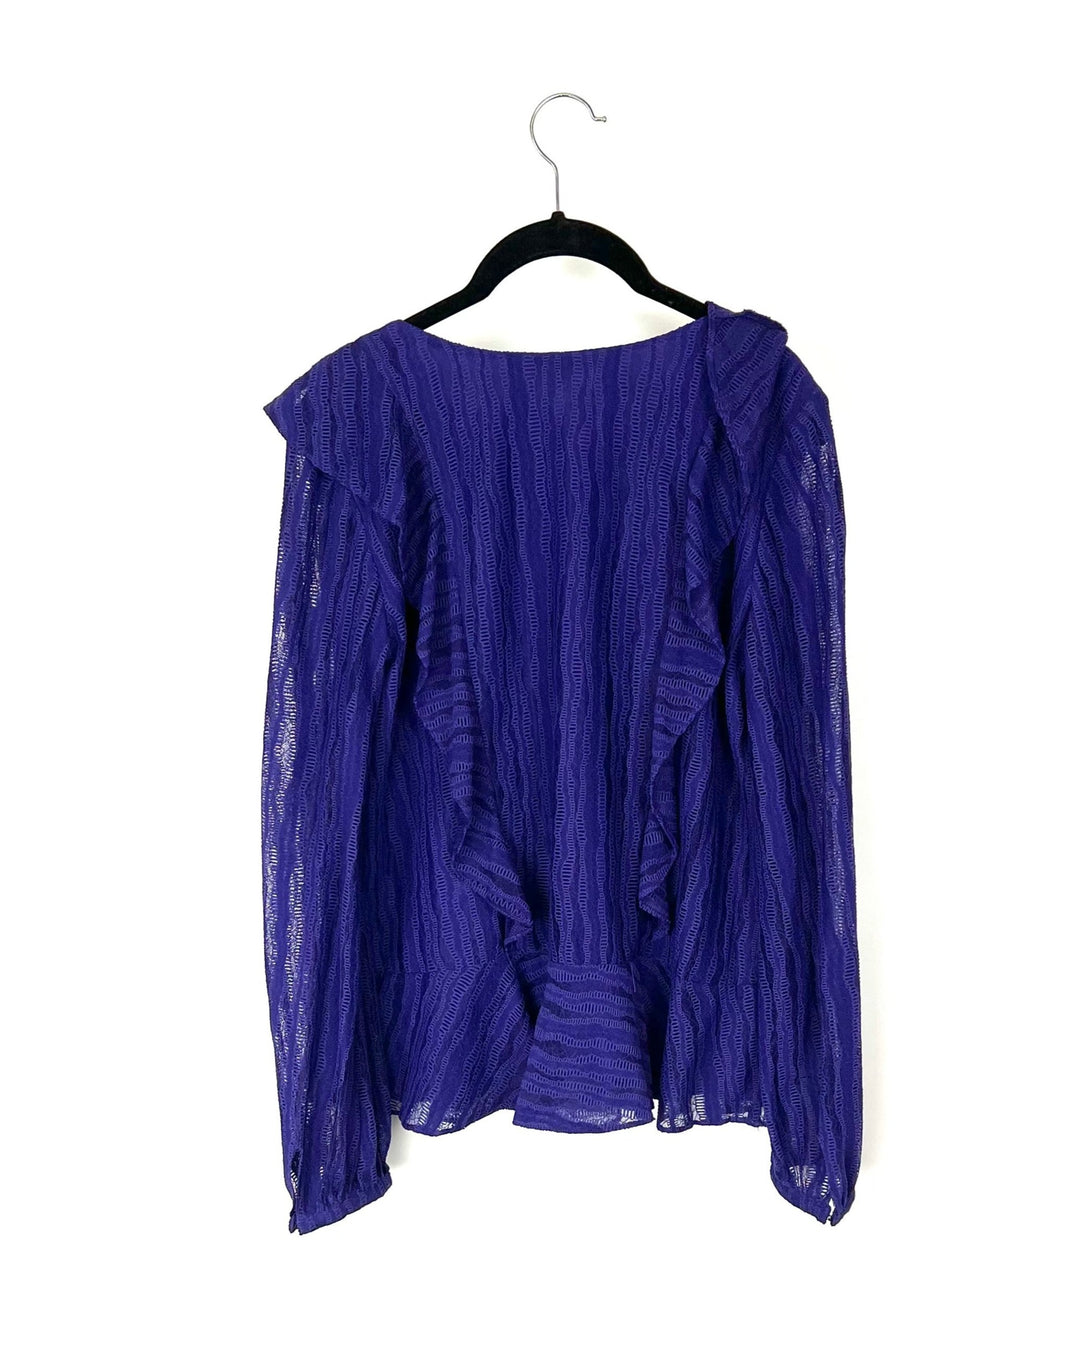 Purple Lace Long Sleeve Top - Small